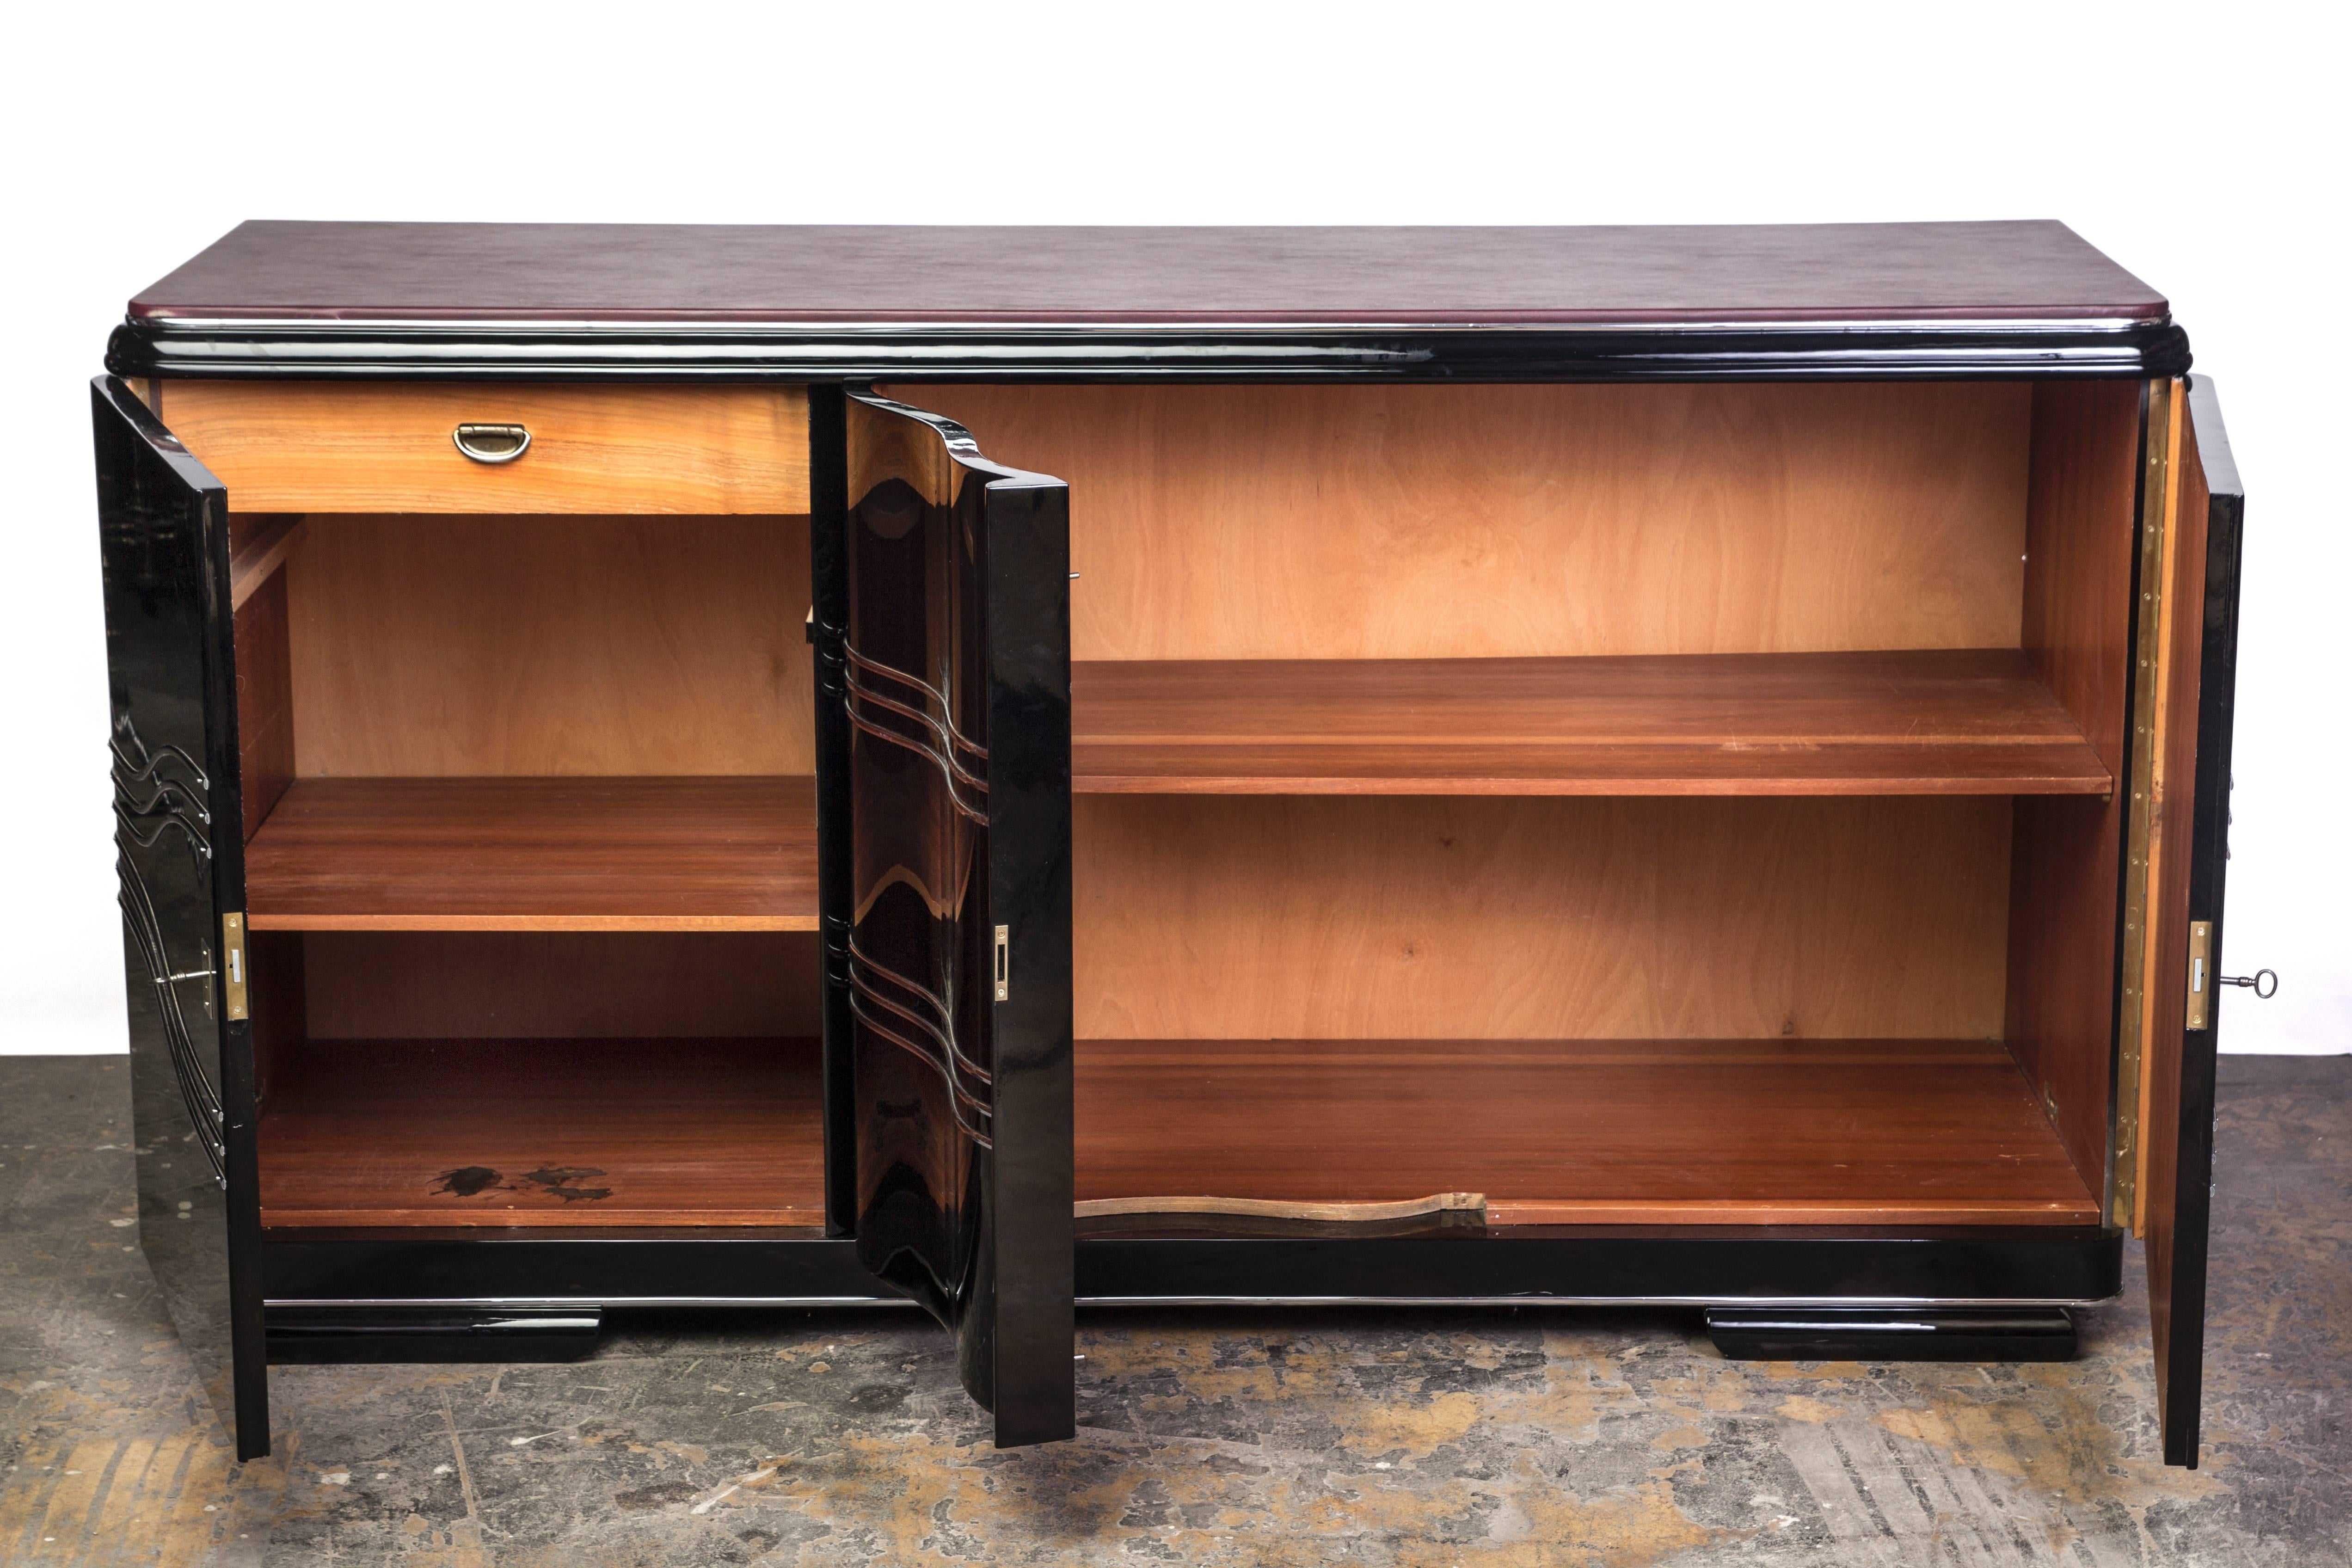 This gorgeous deco sideboard features three (3) swing doors with beautiful chrome detailing. It has a luscious leather top plate with a high gloss finish in black lacquer. Interiors mahogany.
   